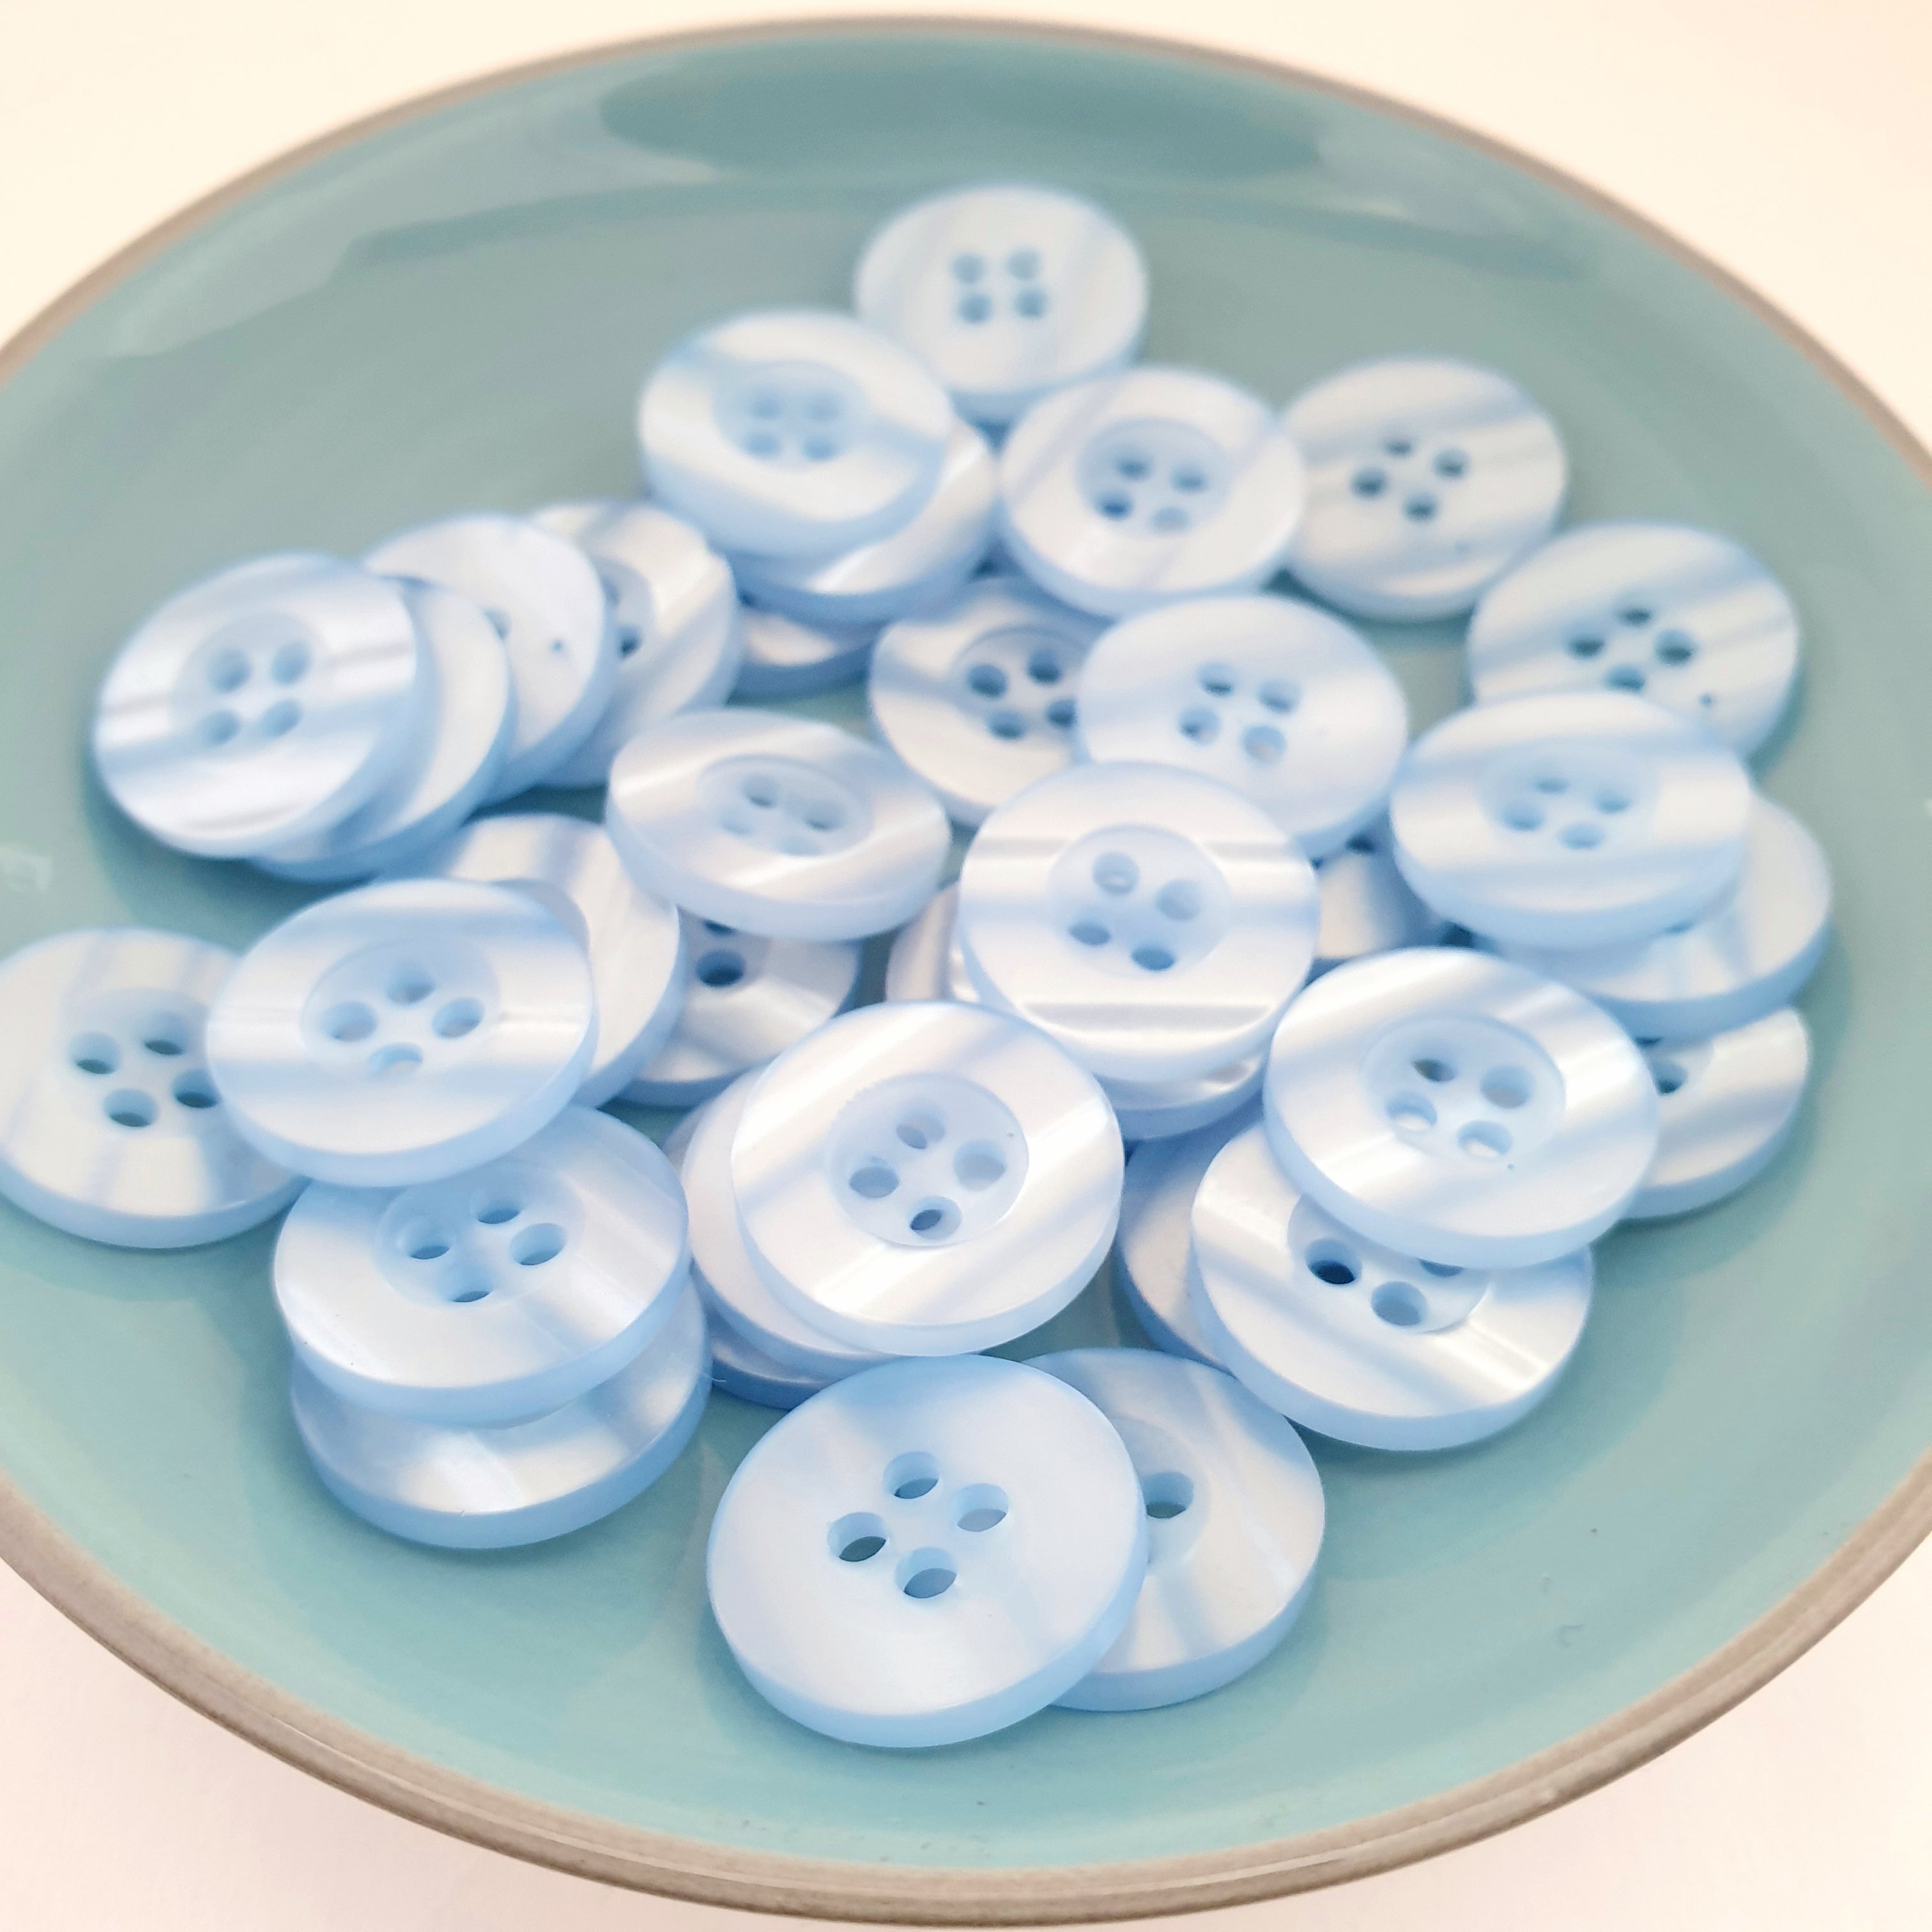 MajorCrafts 50pcs 15mm Baby Blue Pearlescent 4 Holes Round Resin Sewing Buttons